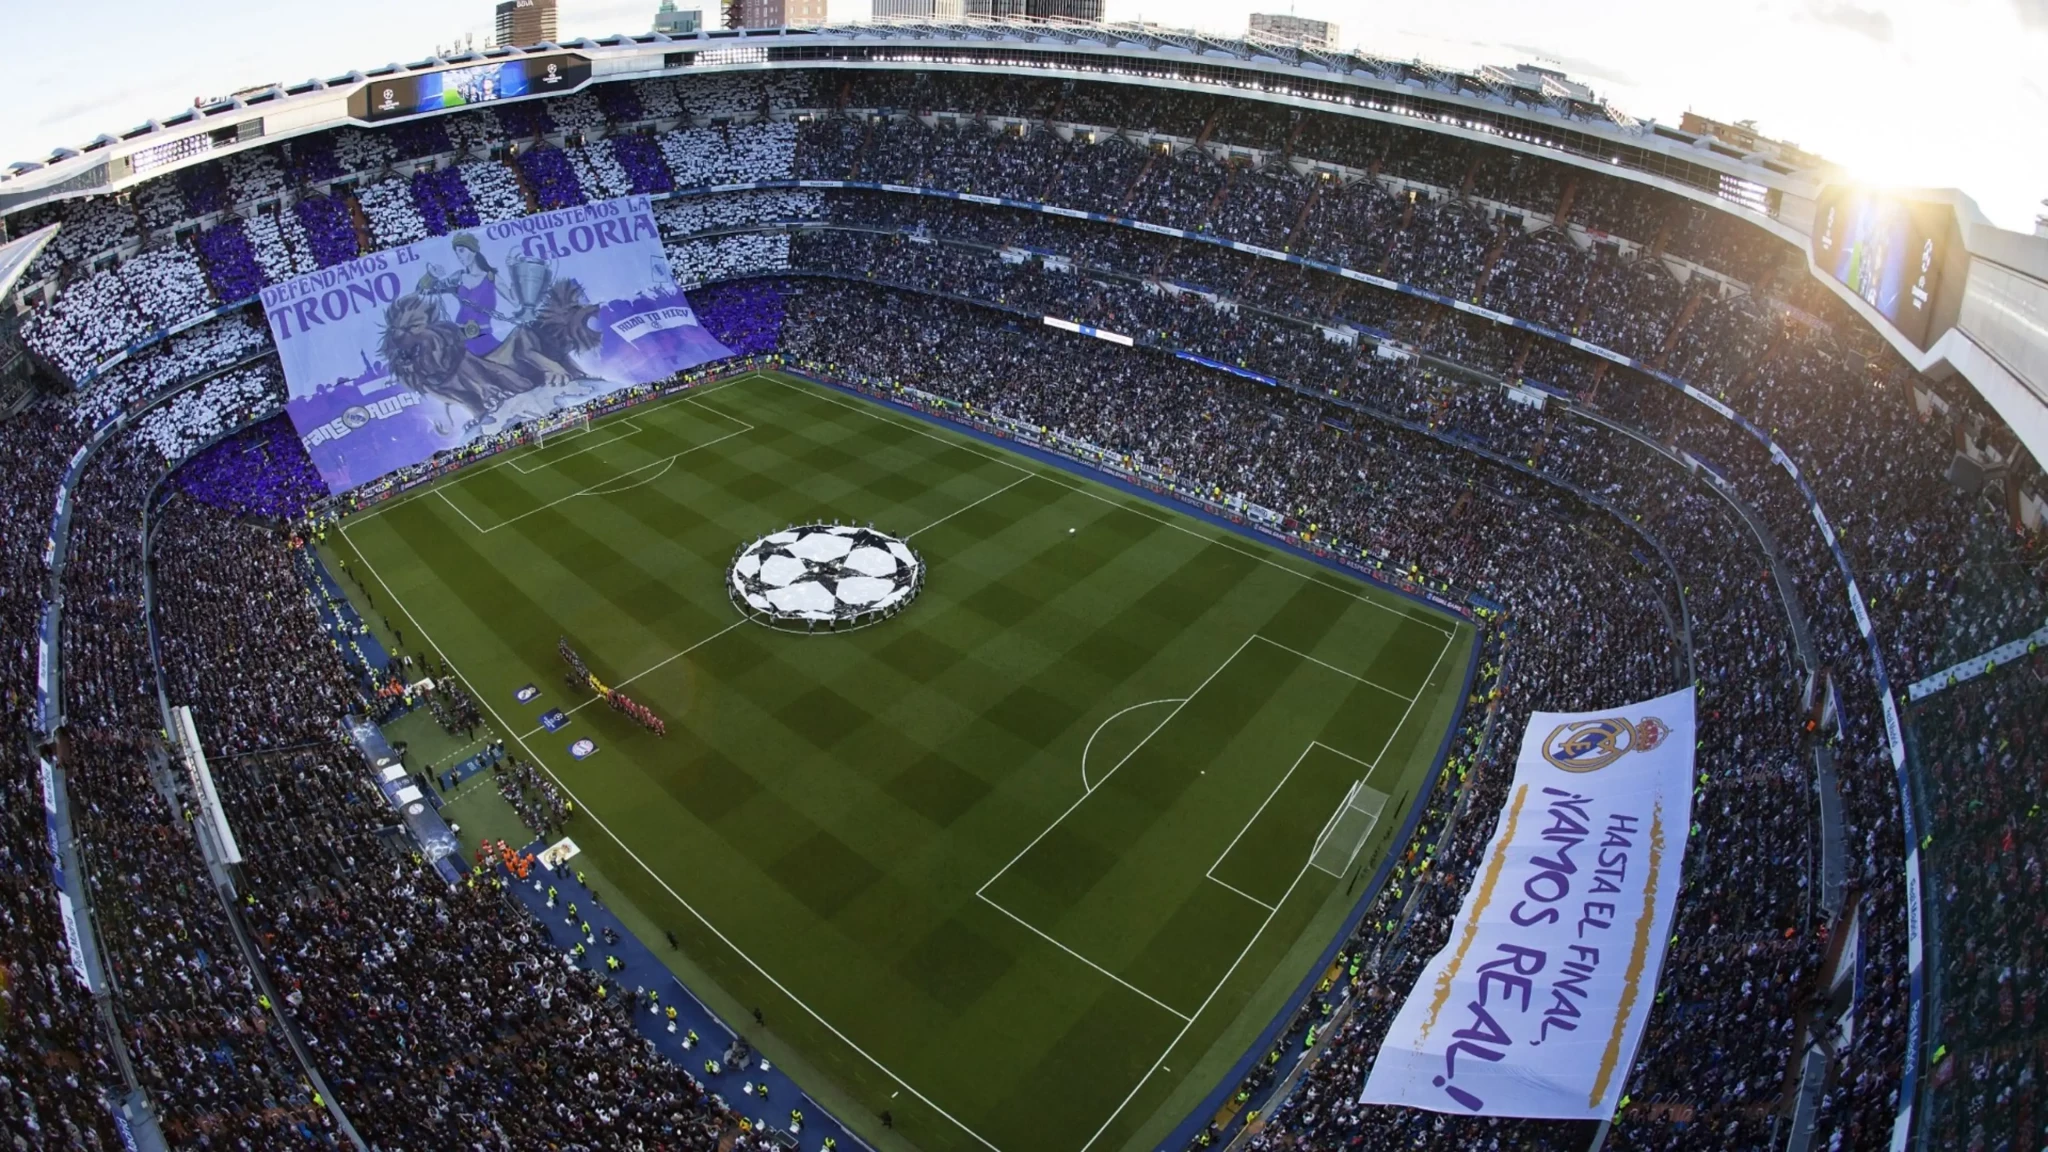 Real Madrid manager Carlo Ancelloti has said the 2030 FIFA World Cup final should be played at the Santiago Bernabeu stadium as it is 